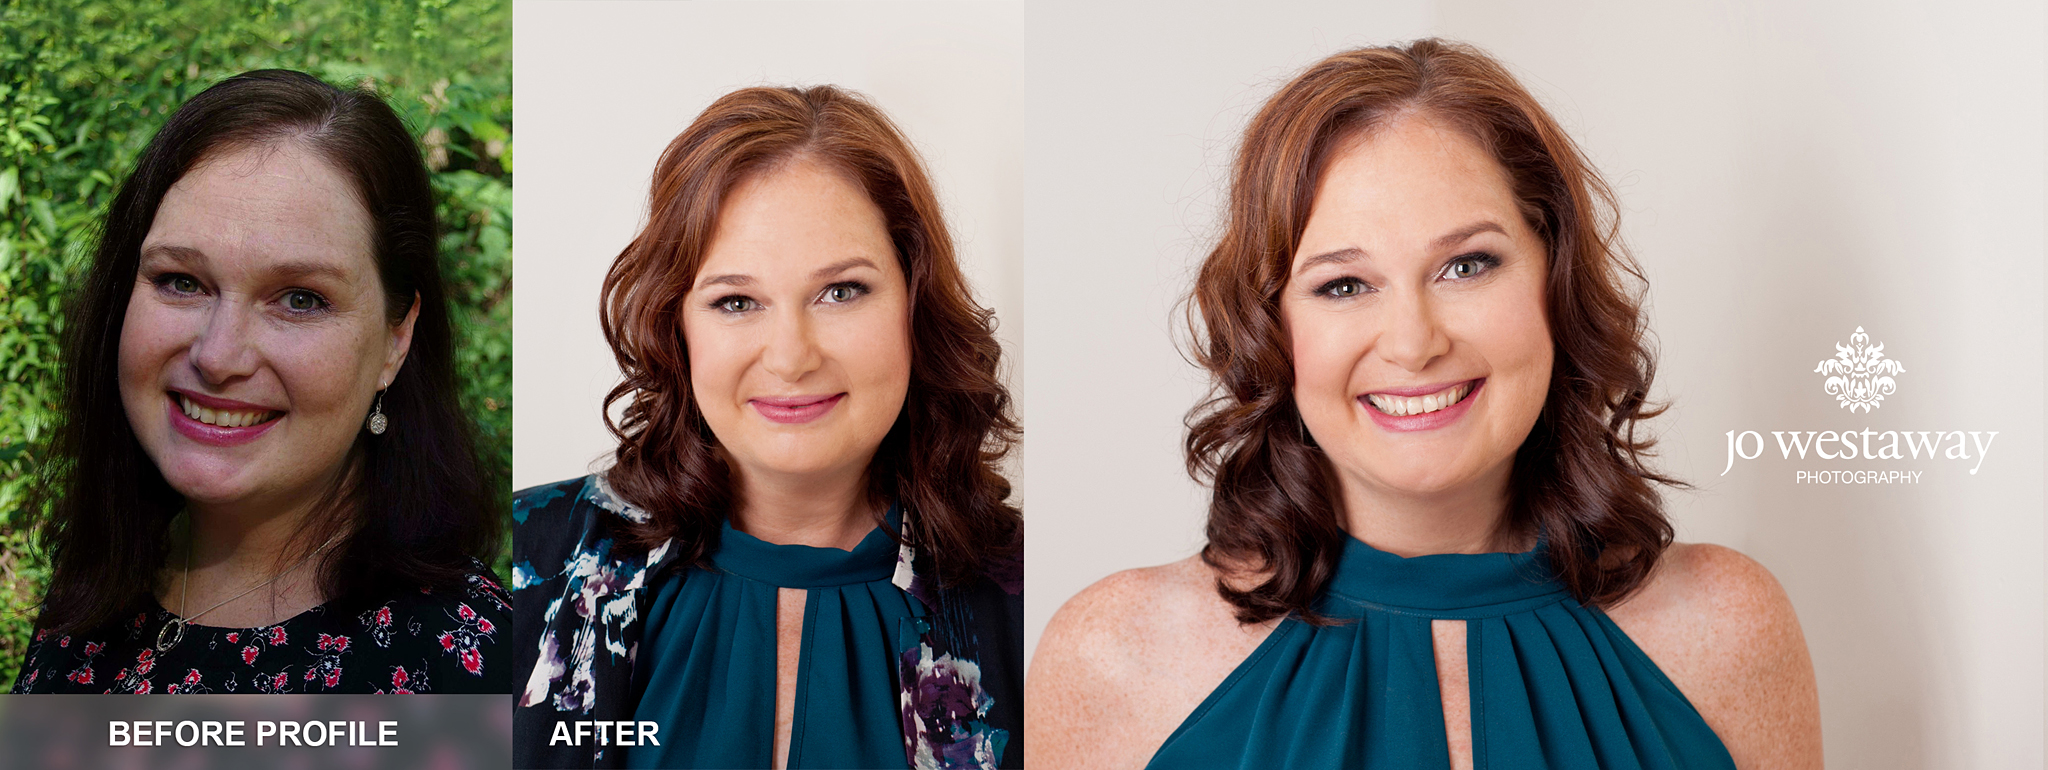 Headshot and persoanl brand before and after photos - Brisbane leading photographer